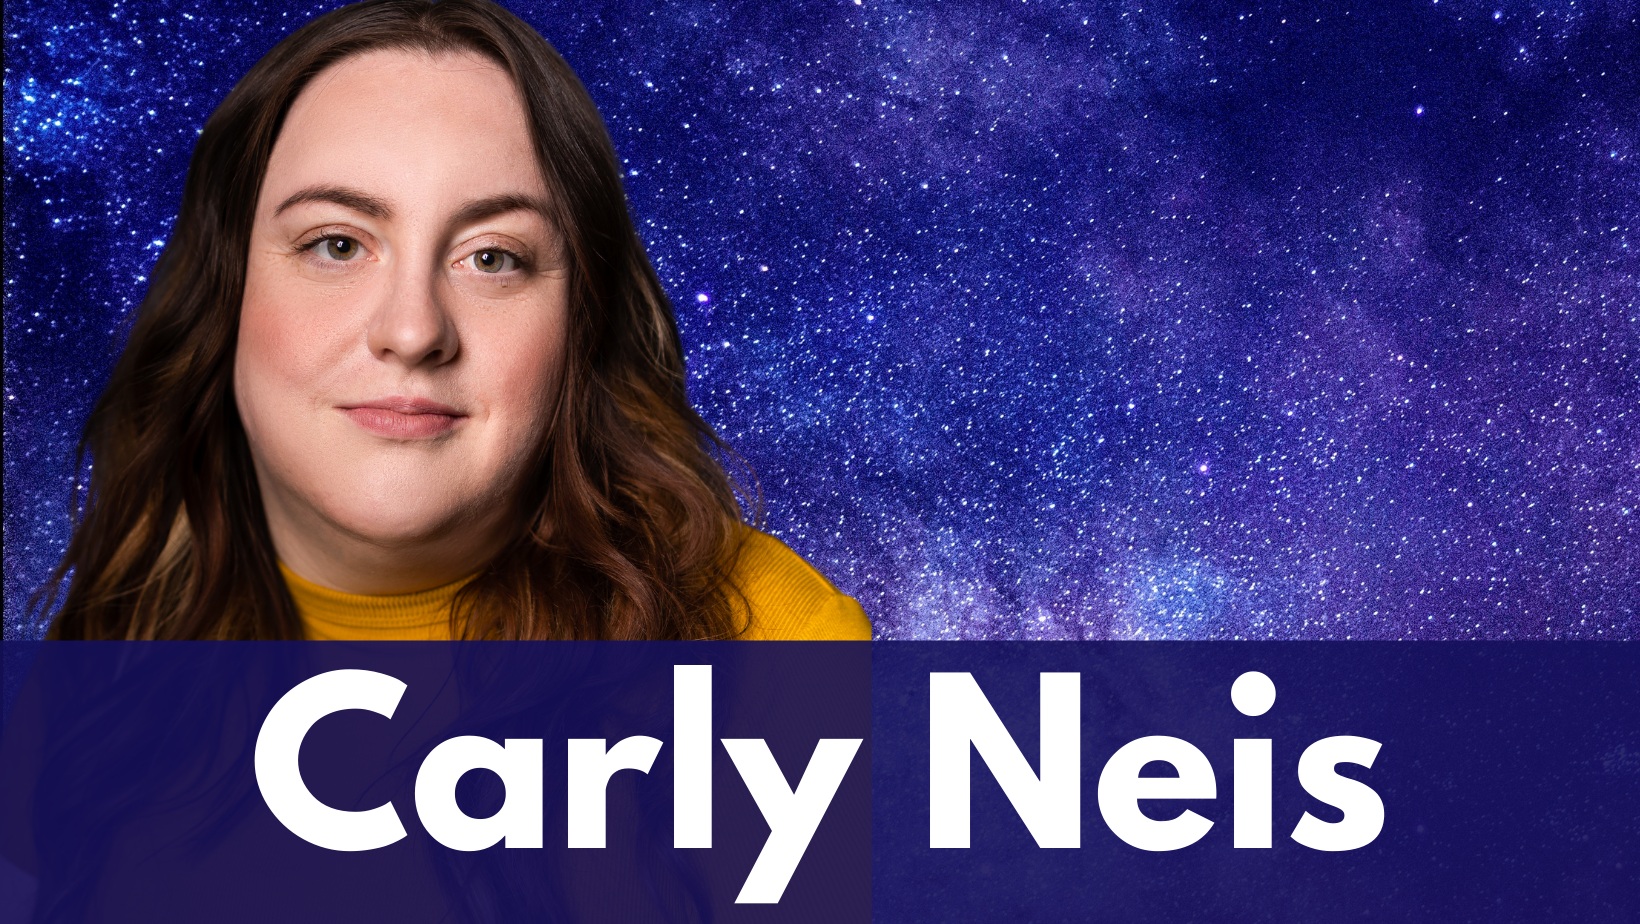 A picture of Carly Neis amid a galaxy